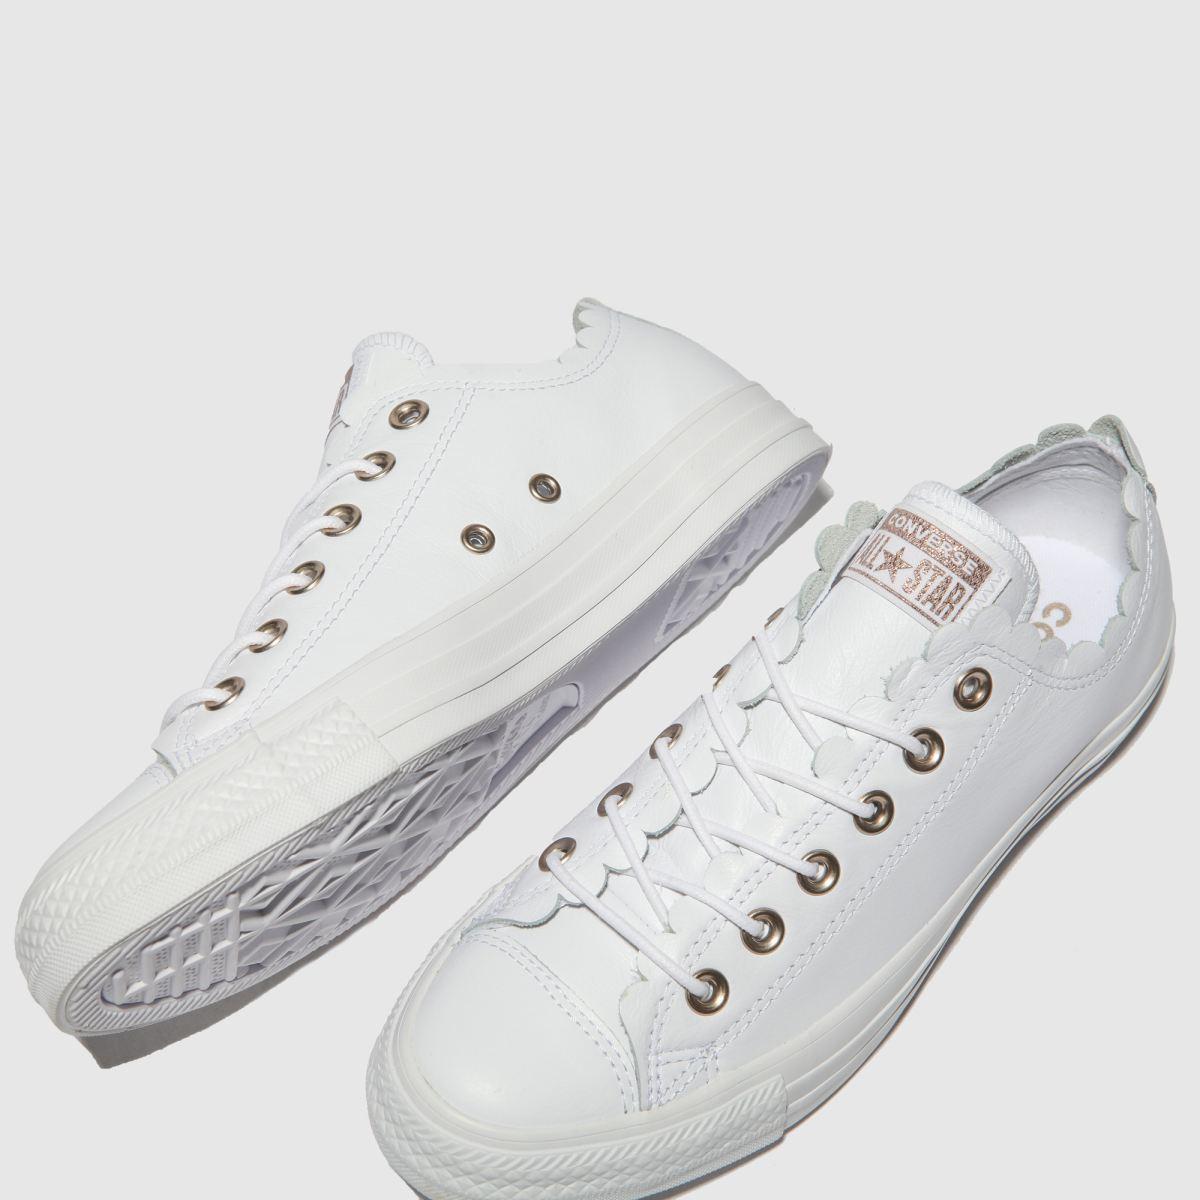 frilly thrills converse white